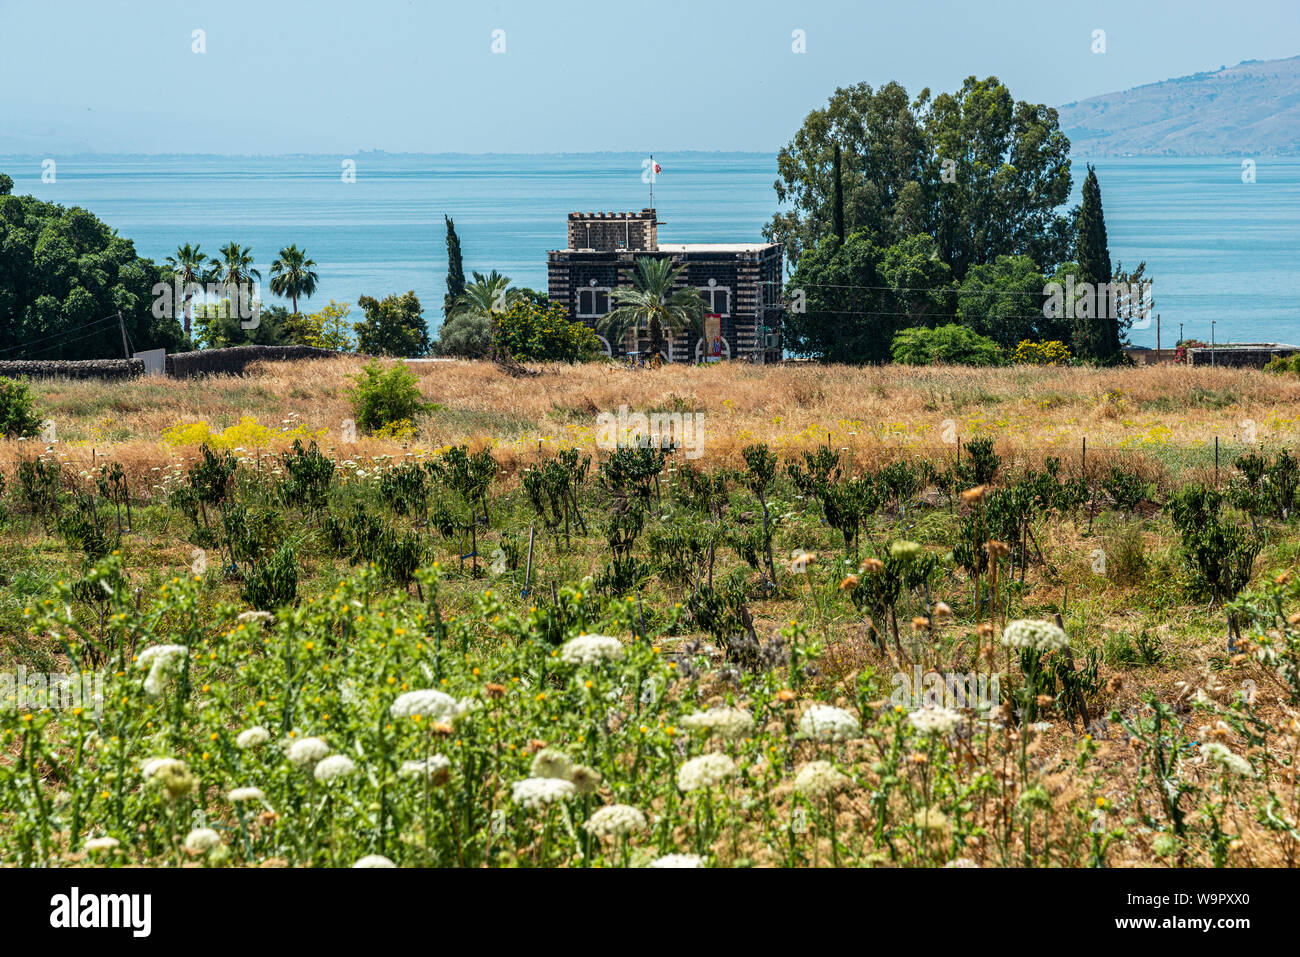 Capernaum, Israel, May 18 2019 : Capharnaum The Town Of Jesus at the shore of the Sea of Galilee Stock Photo